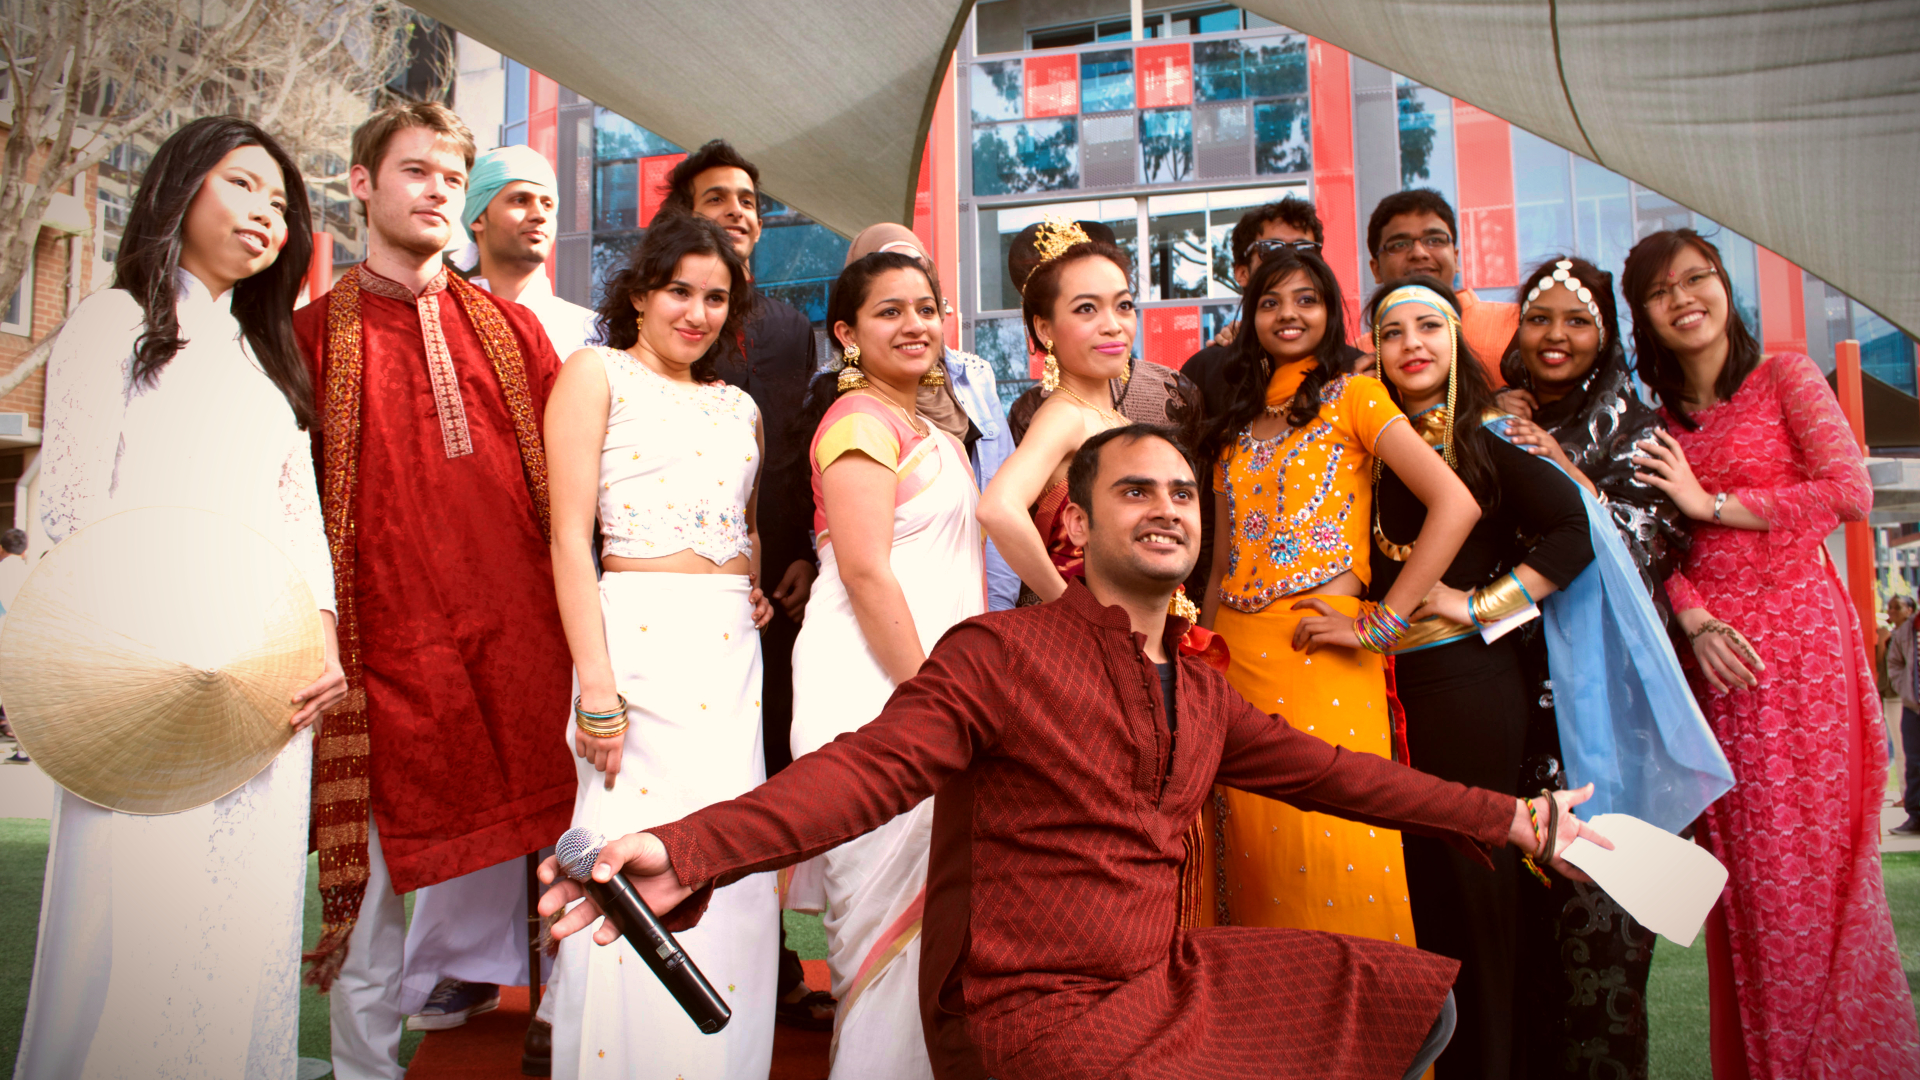 Students wearing traditional outfits from various cultures on Hawthorn campus